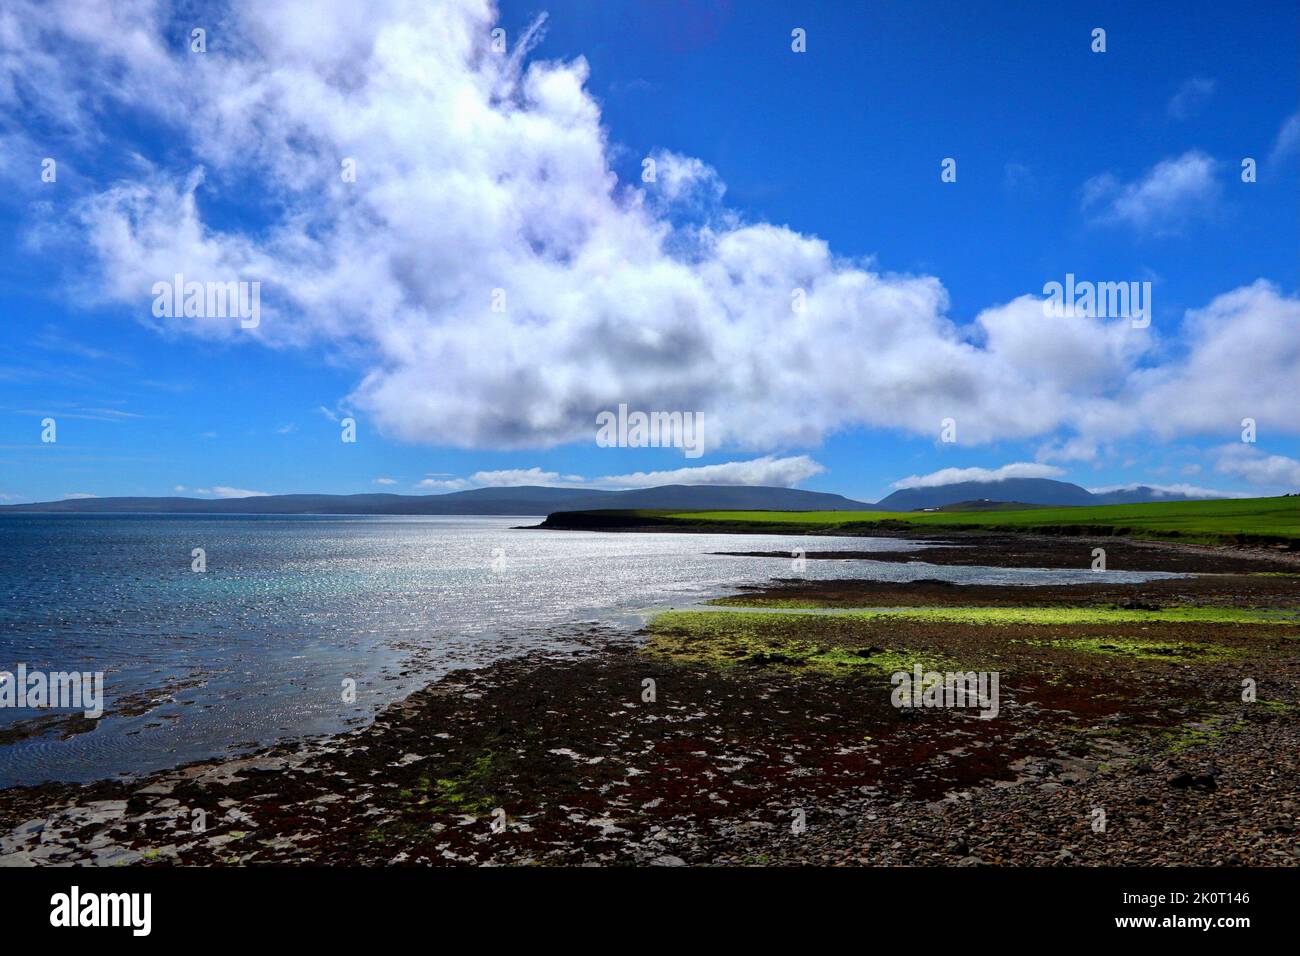 The Orkney coastline at Orphir looking towards Houton and the hills of Hoy. Stock Photo